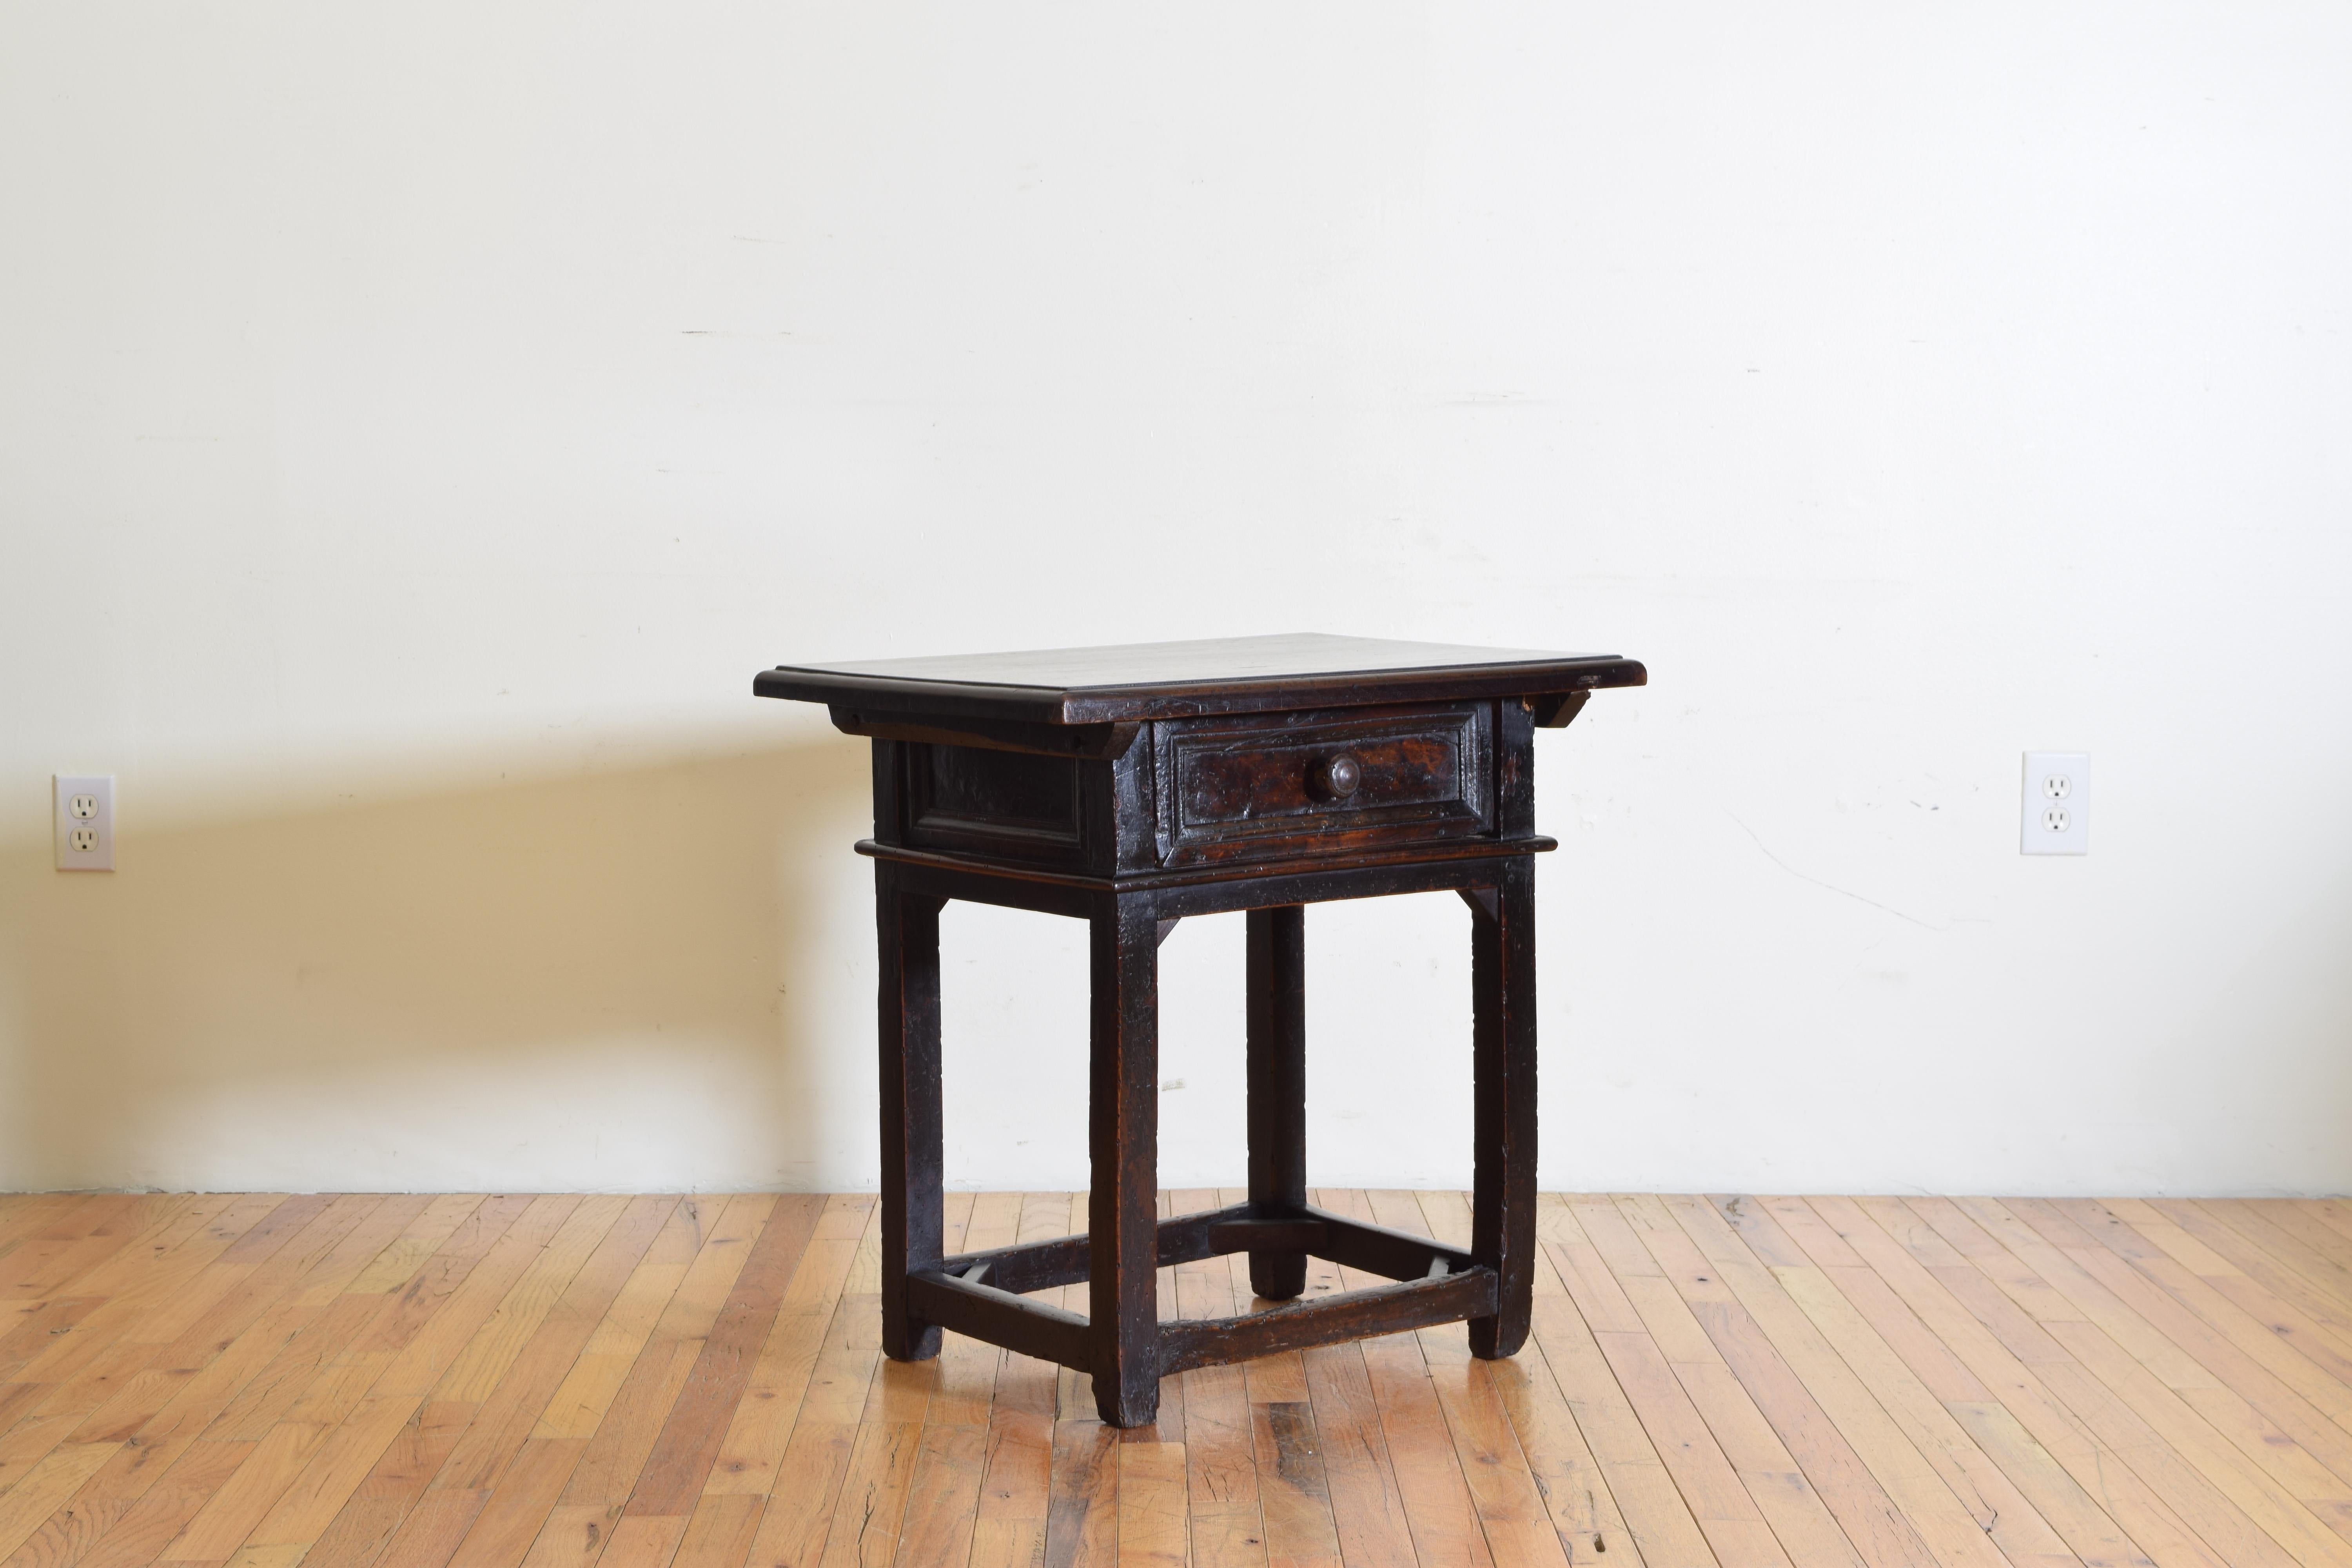 The rectangular top with molded edge above a case housing one drawer and having paneled sides, raised on straight legs joined by a box stretcher with open corner bracing, this type of low table was typically used for working on small objects or